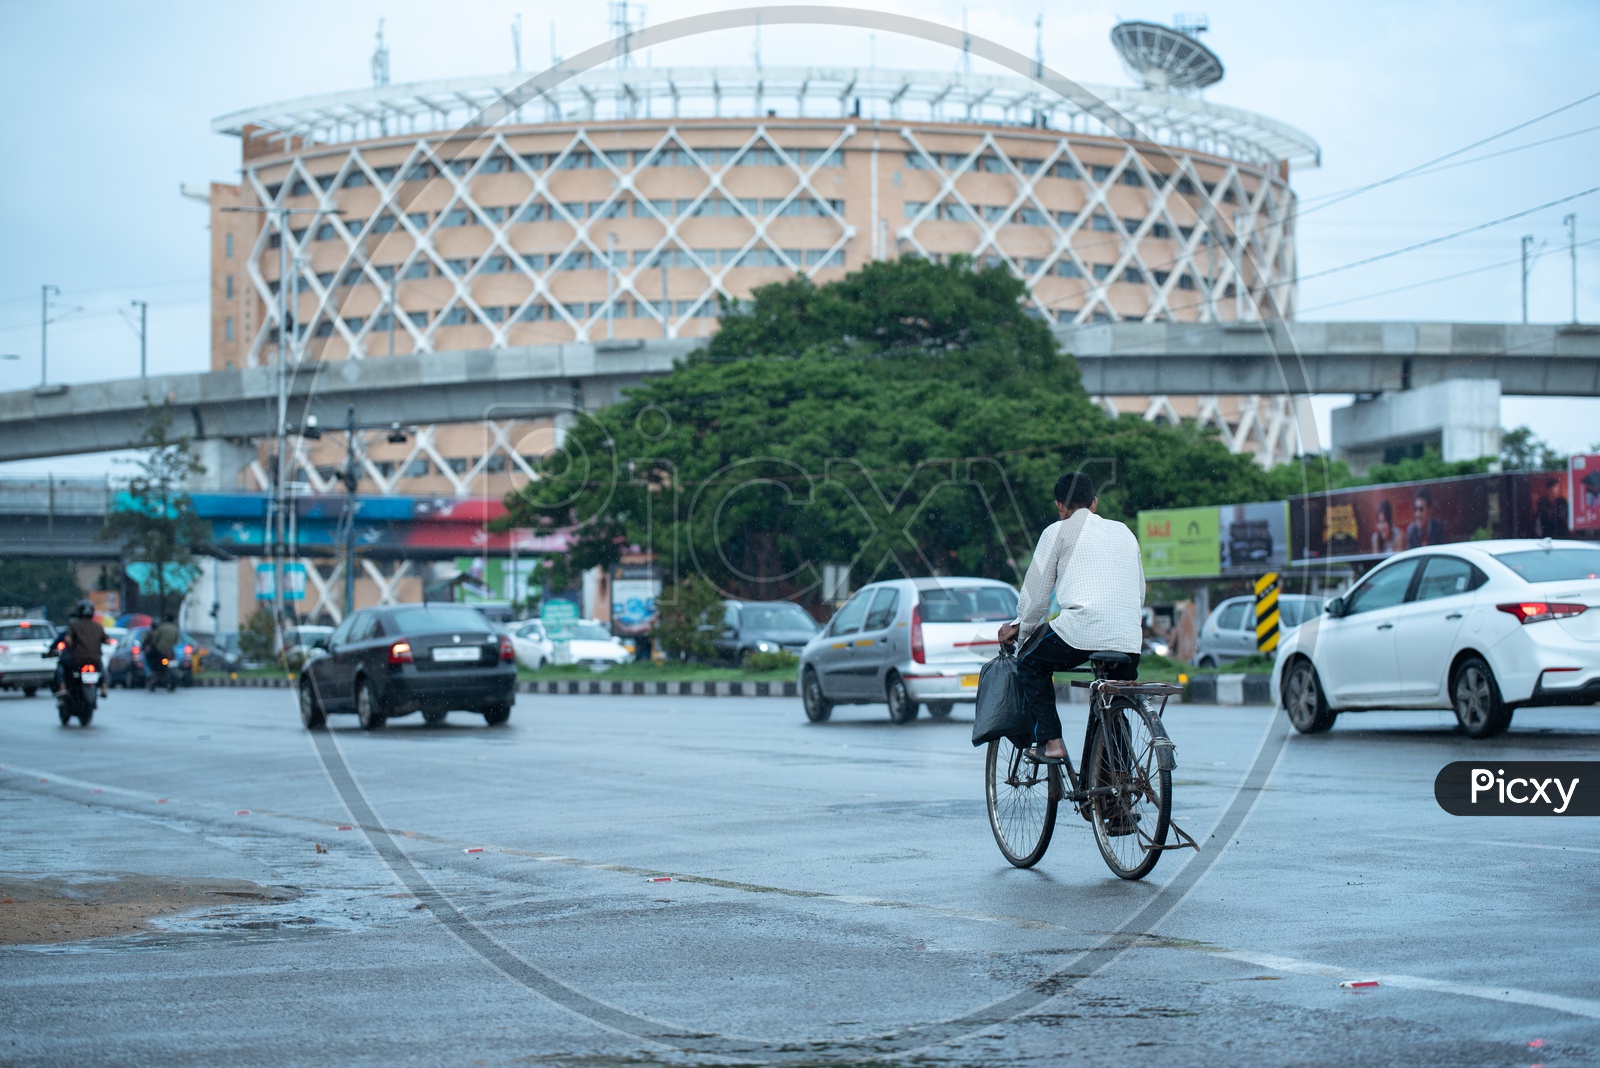 A Man Riding a Bicycle on The Roads of Hi-tech City Near Cyber Towers